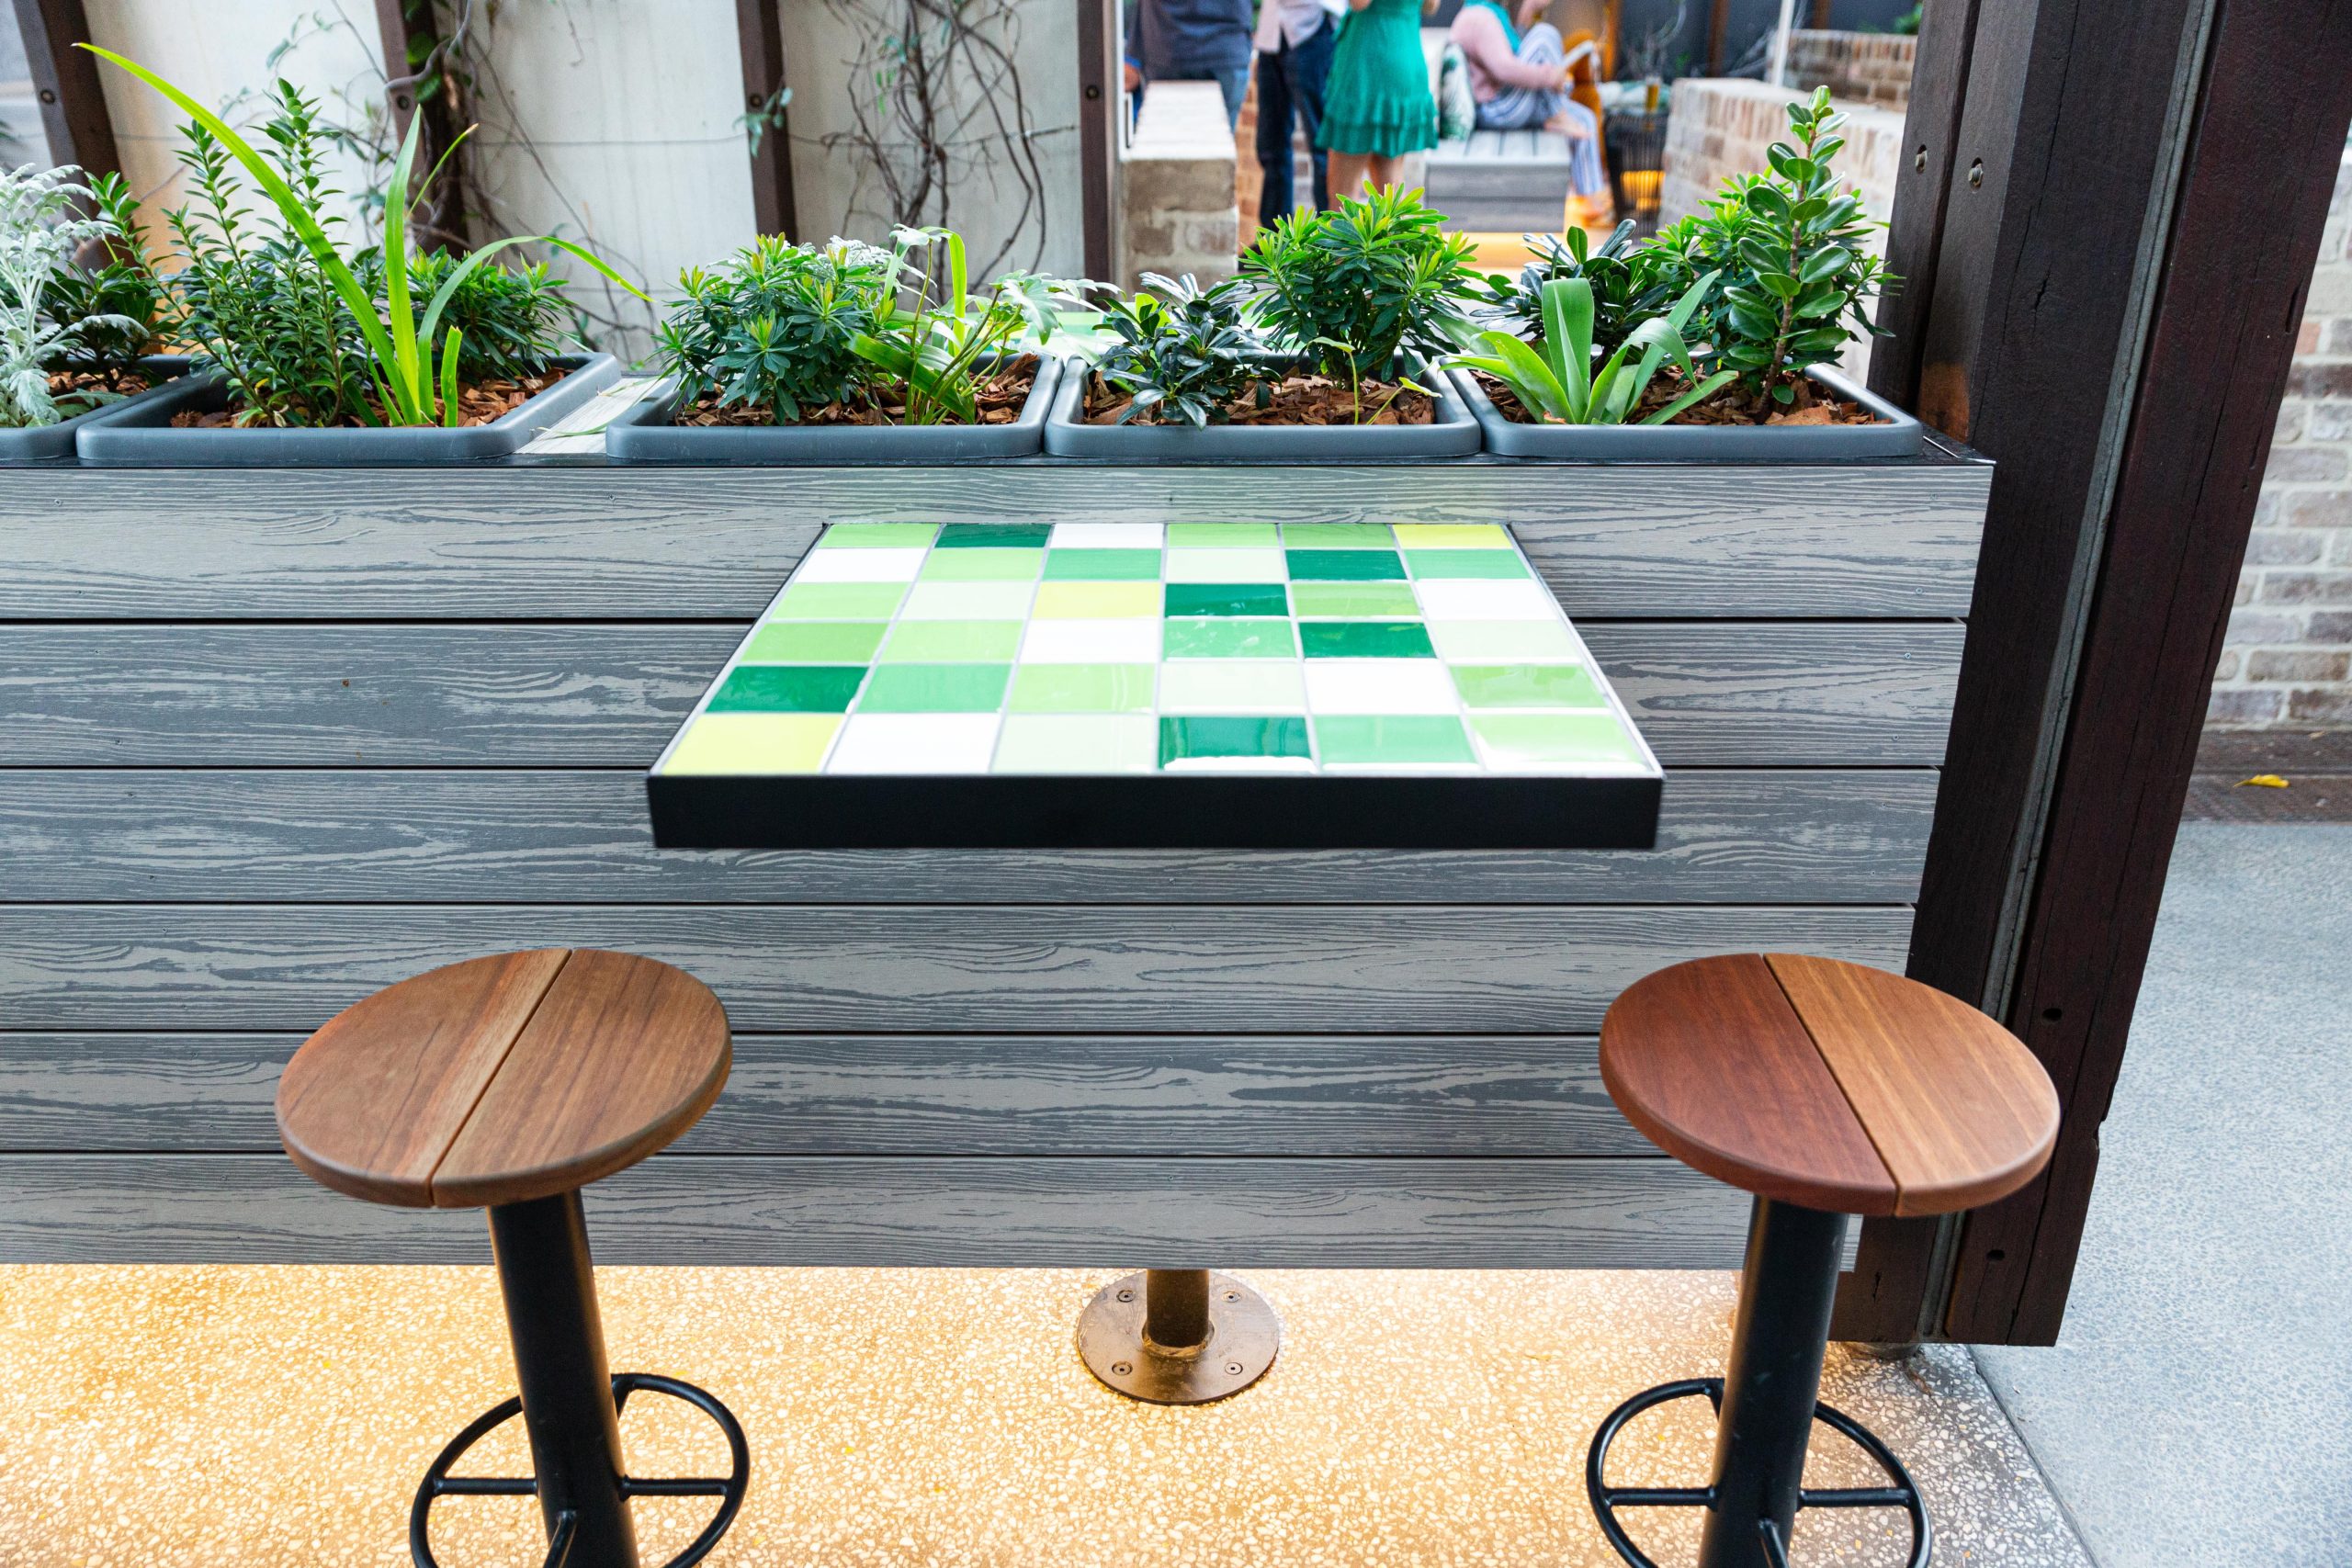 A tile checkered table installed into the side of a planter box wall